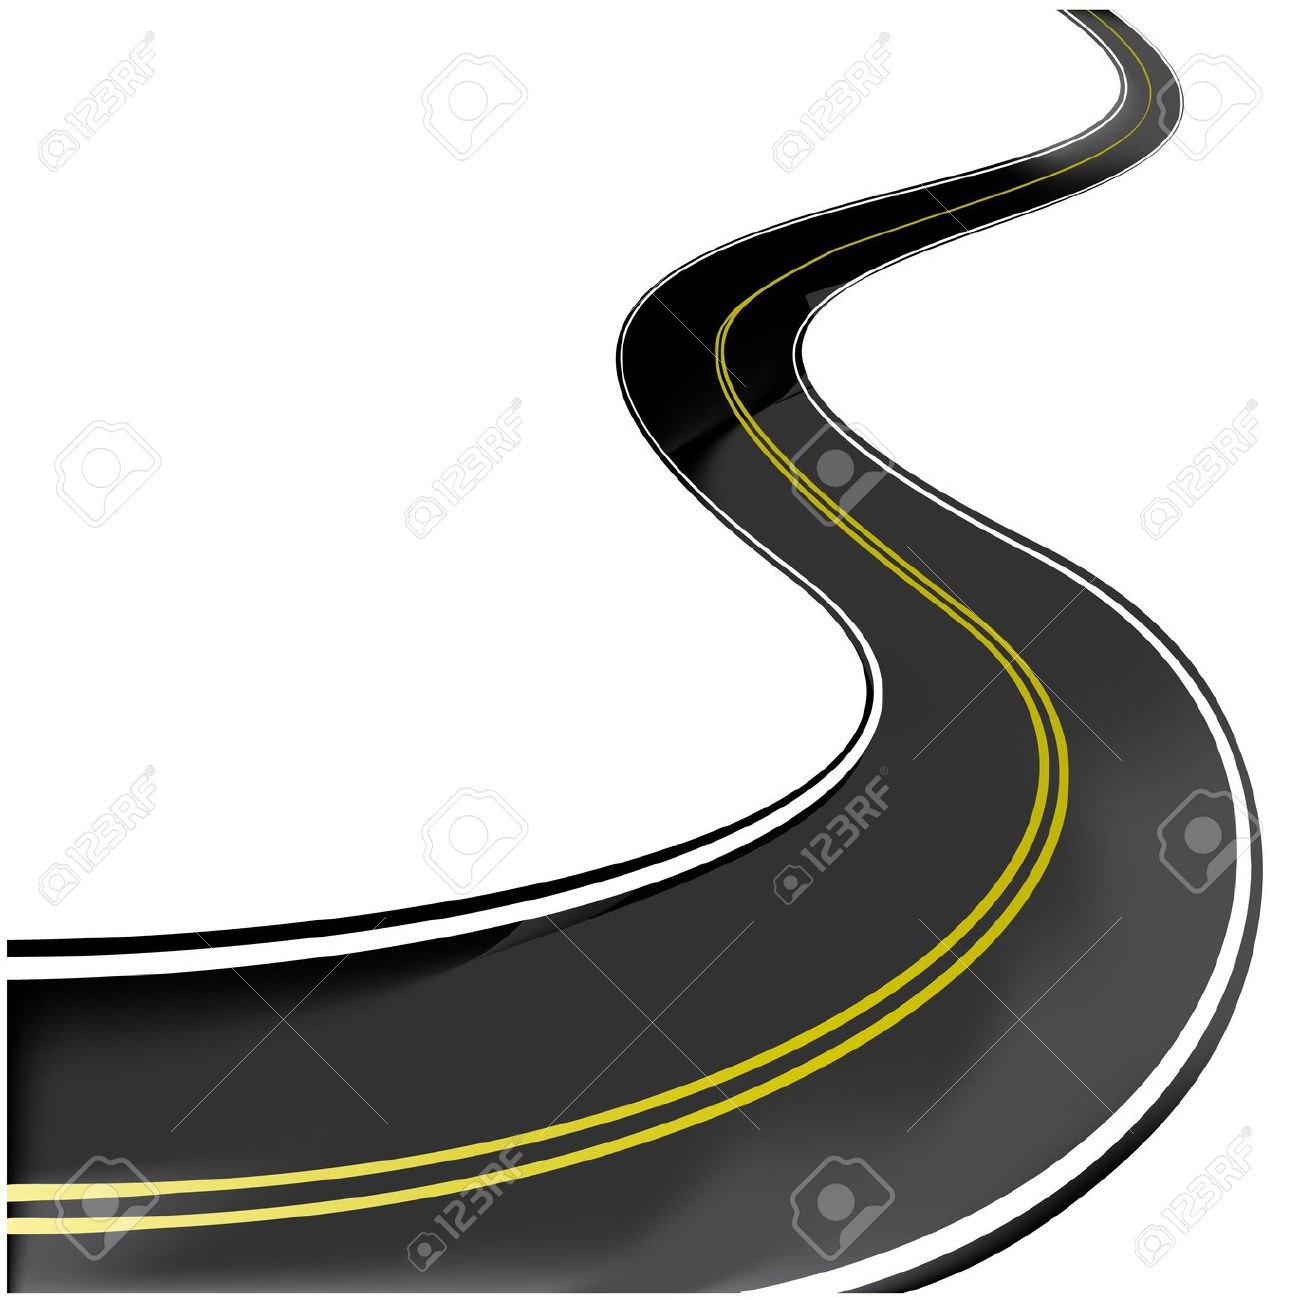 Highway clipart windy road. Winding free download best